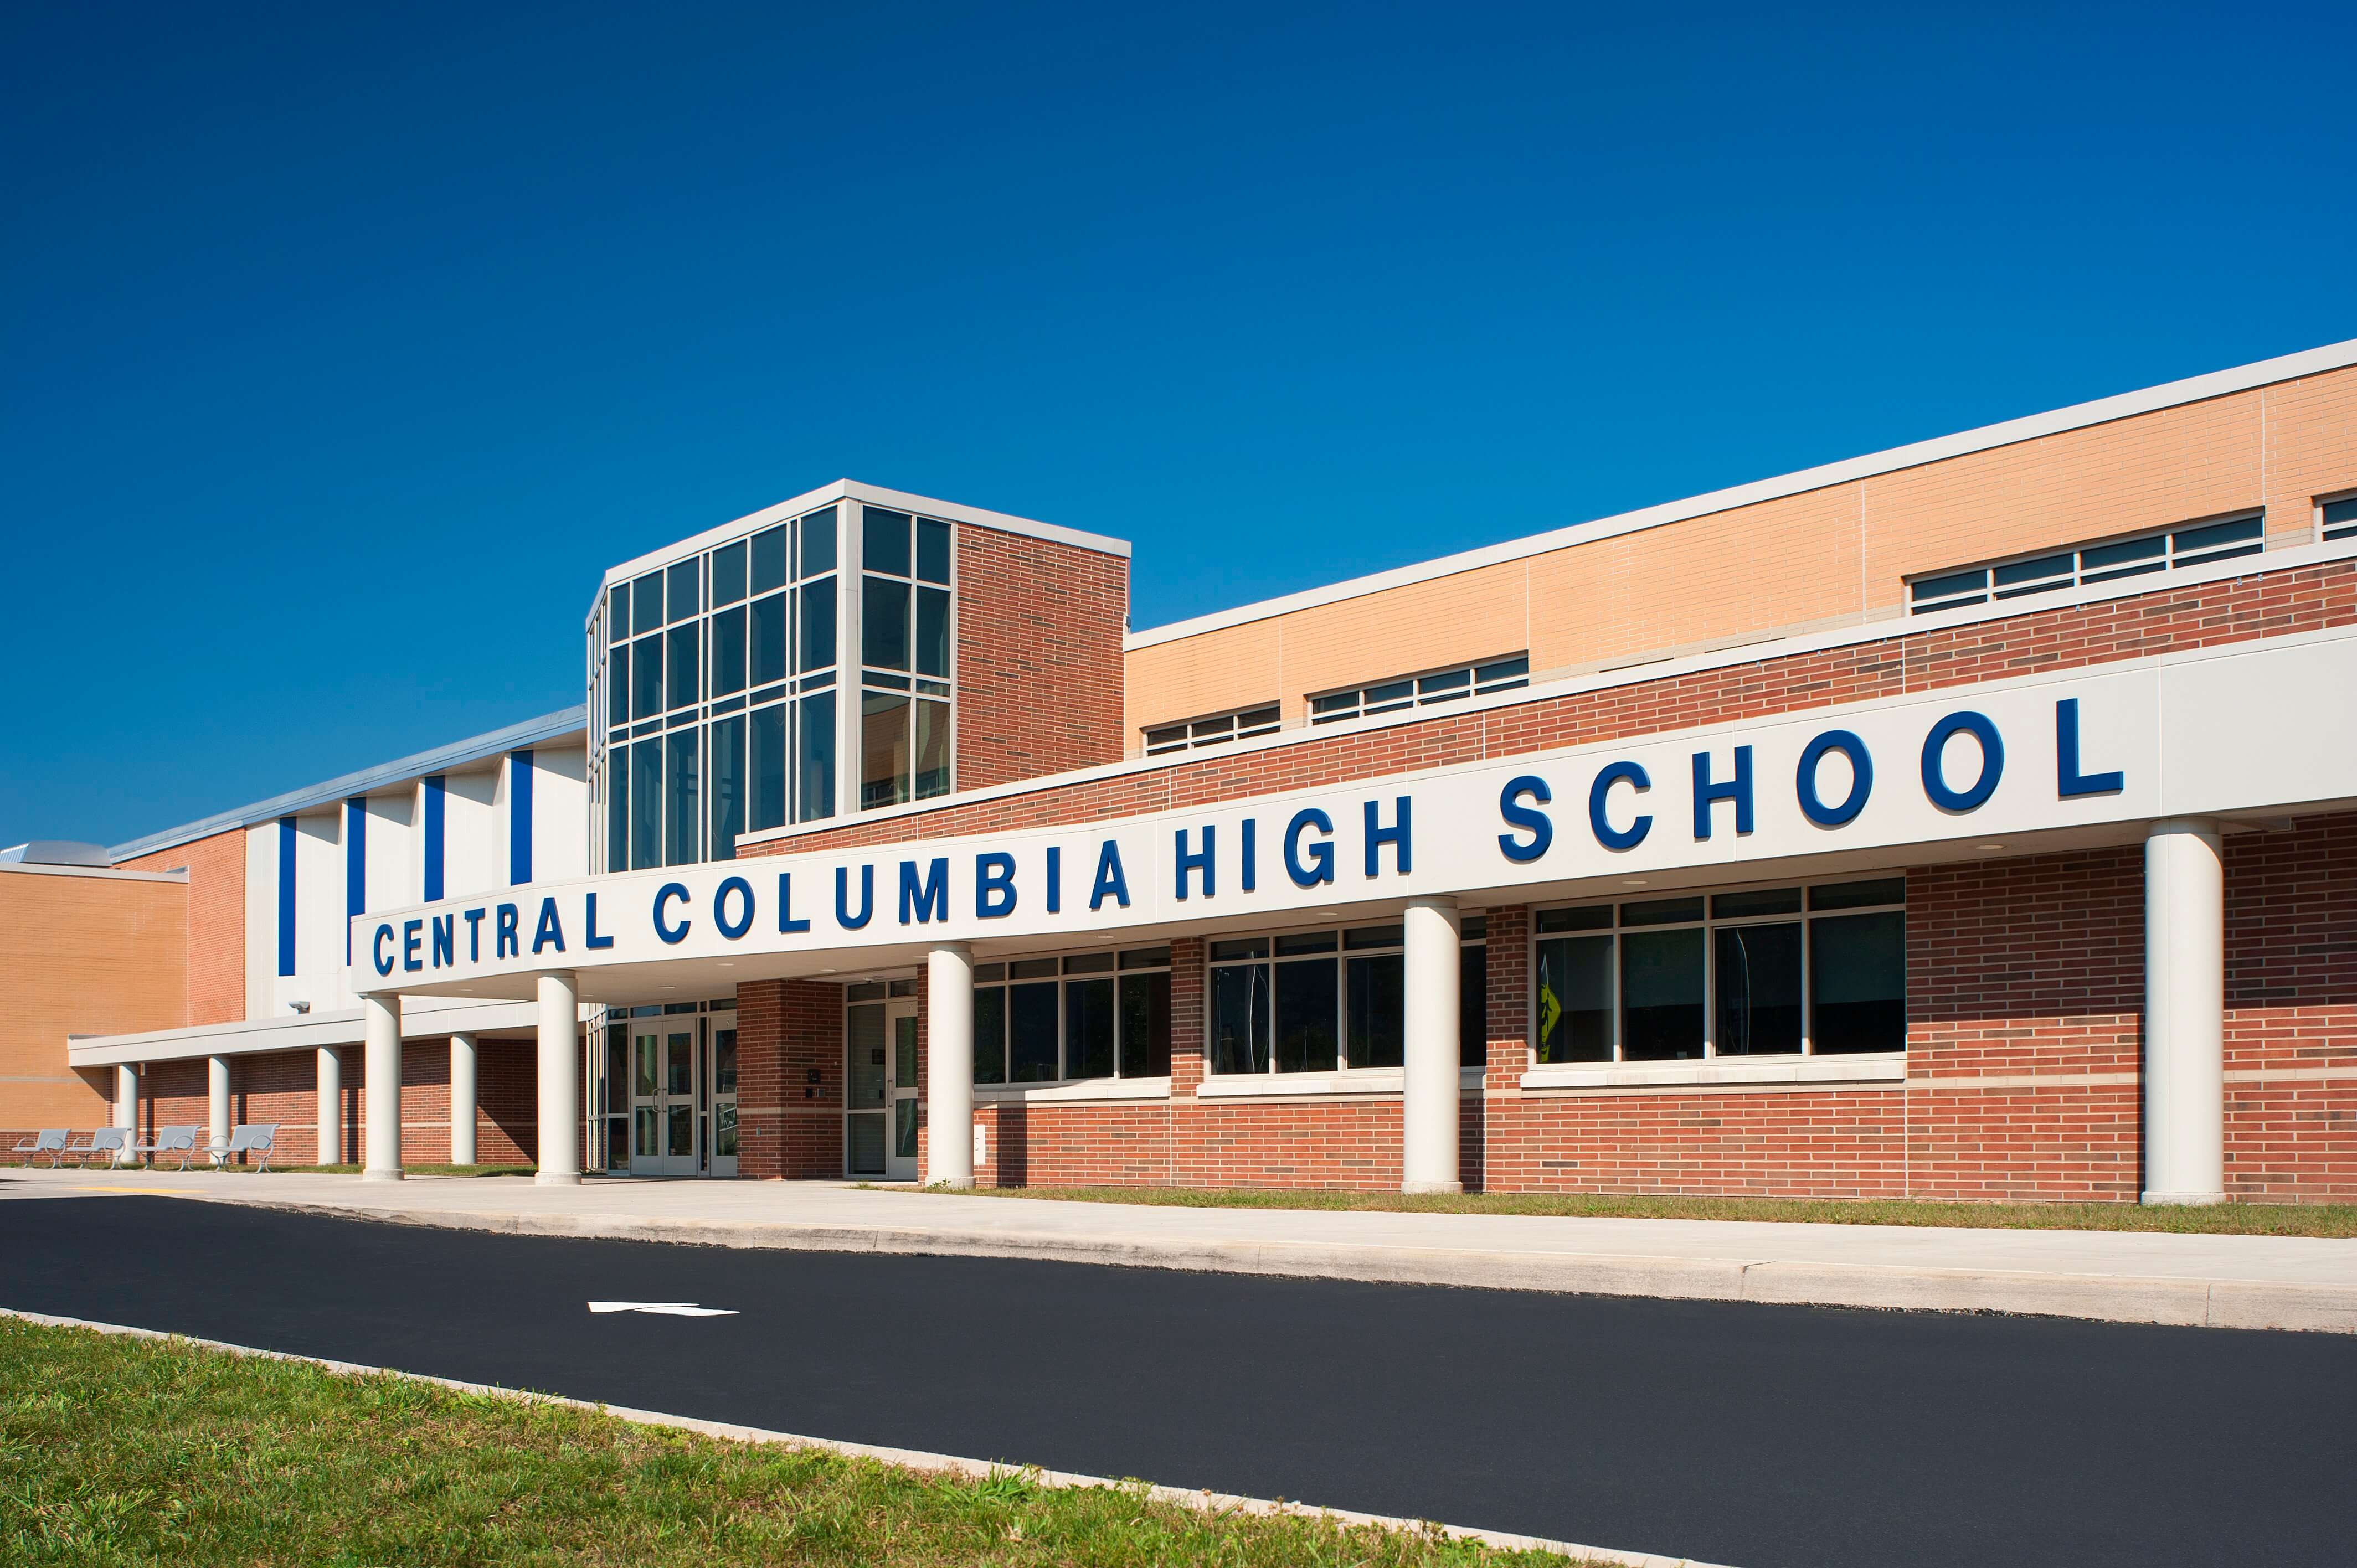 Innovative construction sets the stage for student success at Central Columbia High School